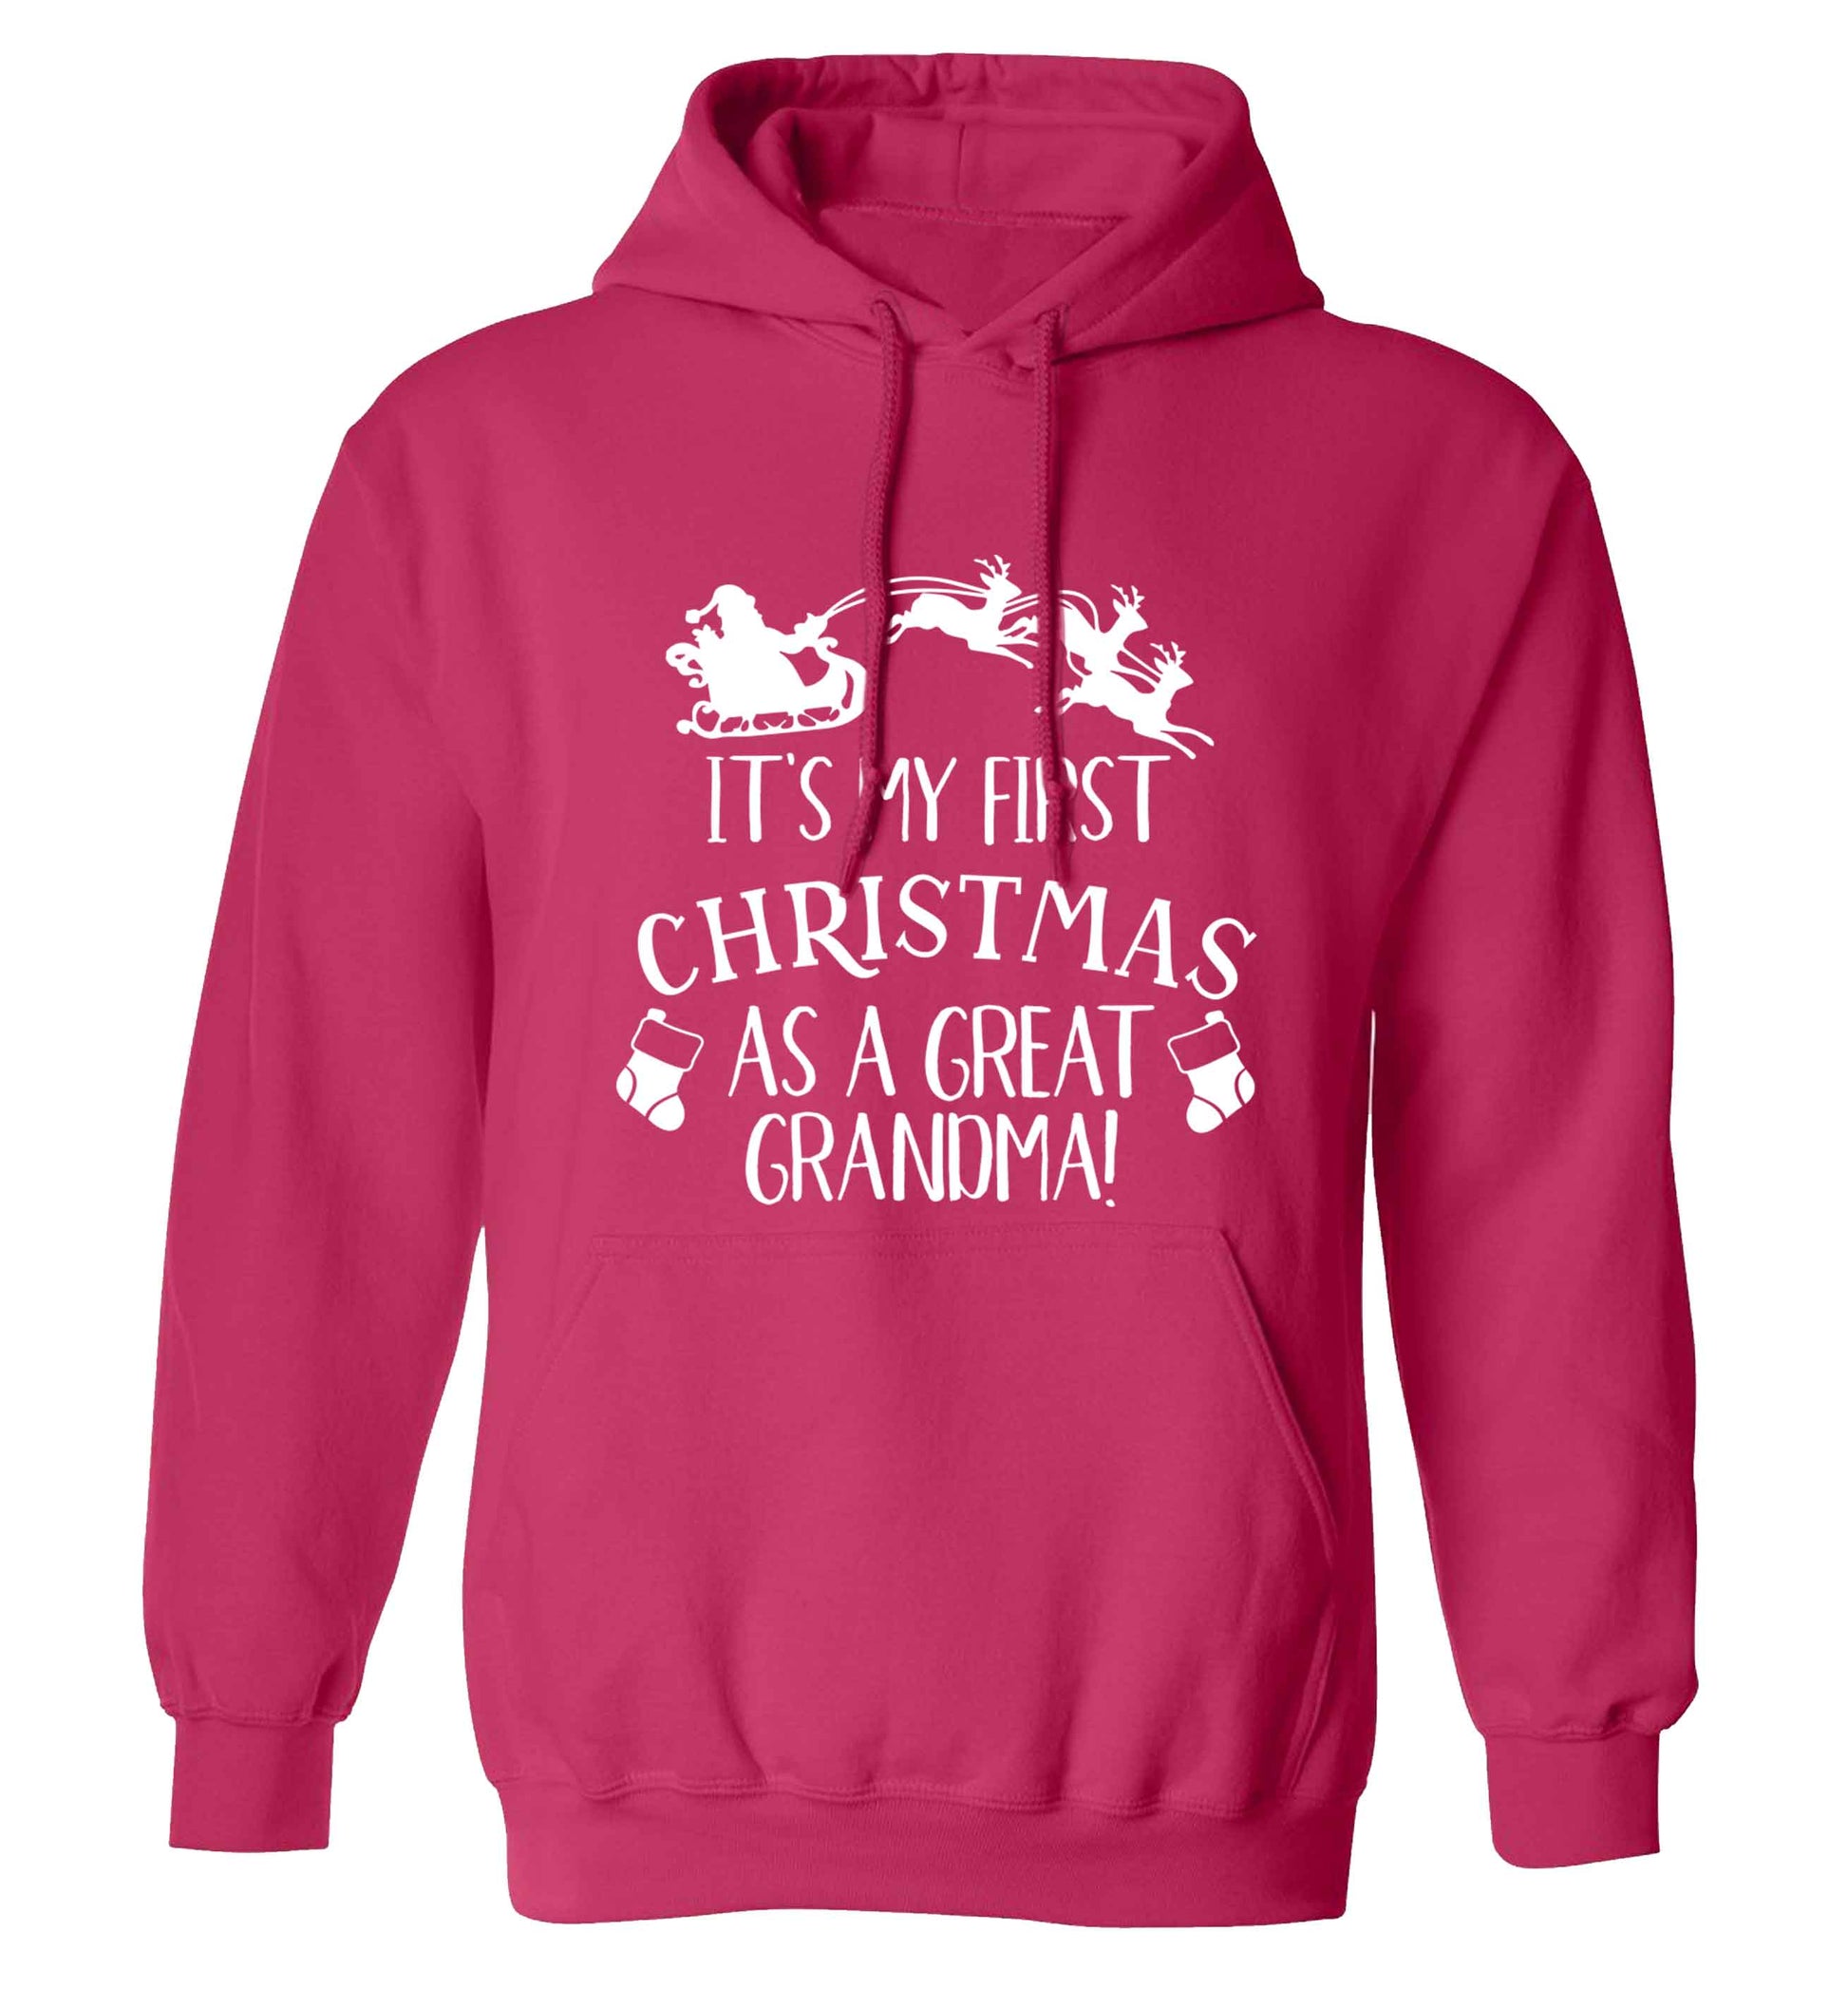 It's my first Christmas as a great grandma! adults unisex pink hoodie 2XL